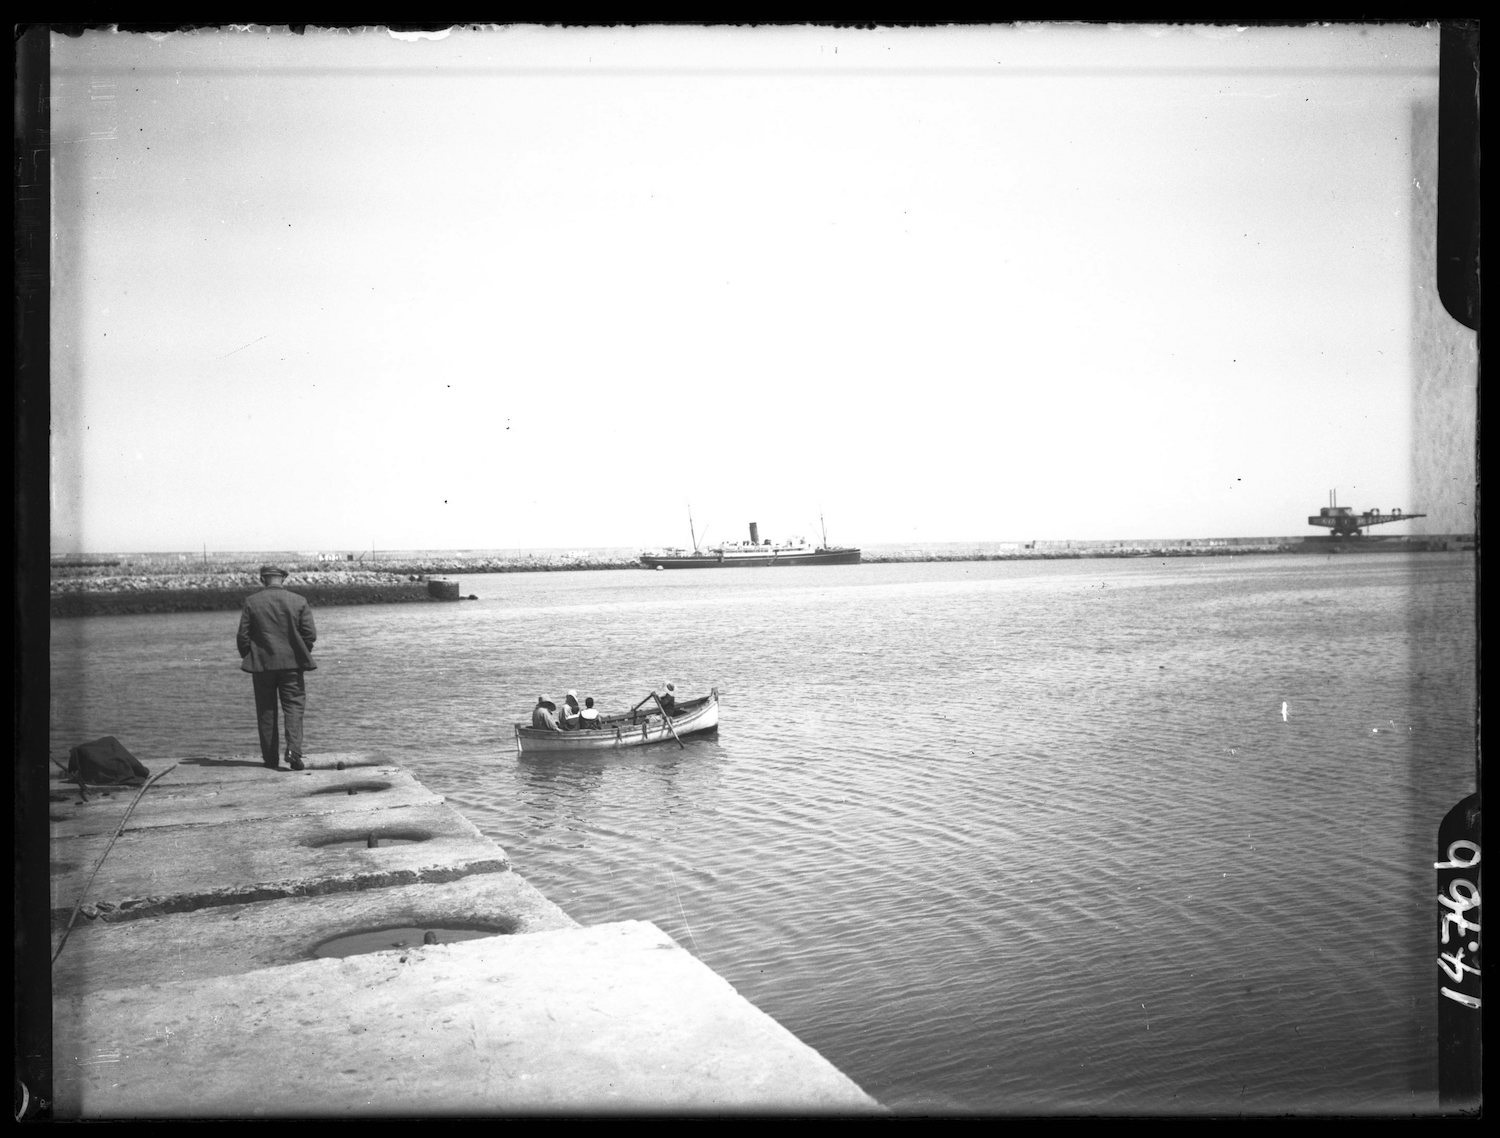 View of a man in European dress standing on the quay looking at the harbor as a rowboat passes